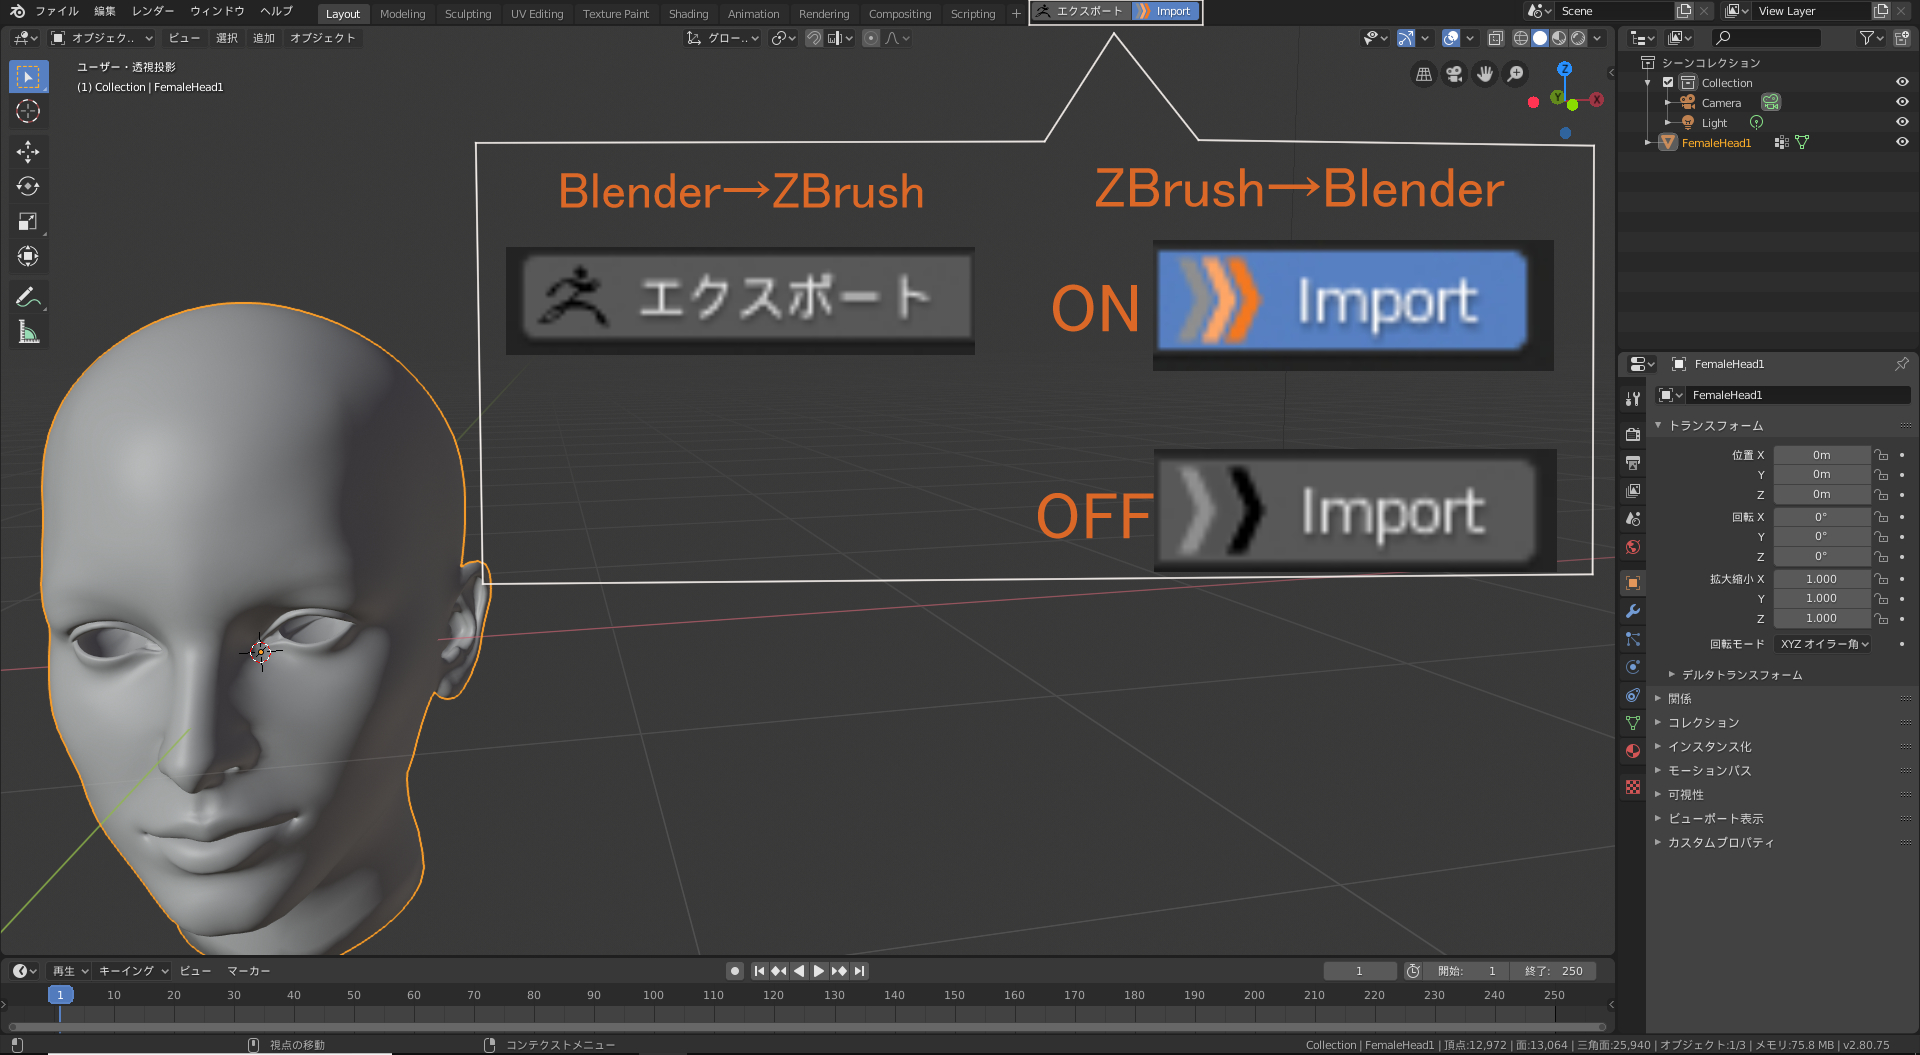 how to open blender files in zbrush